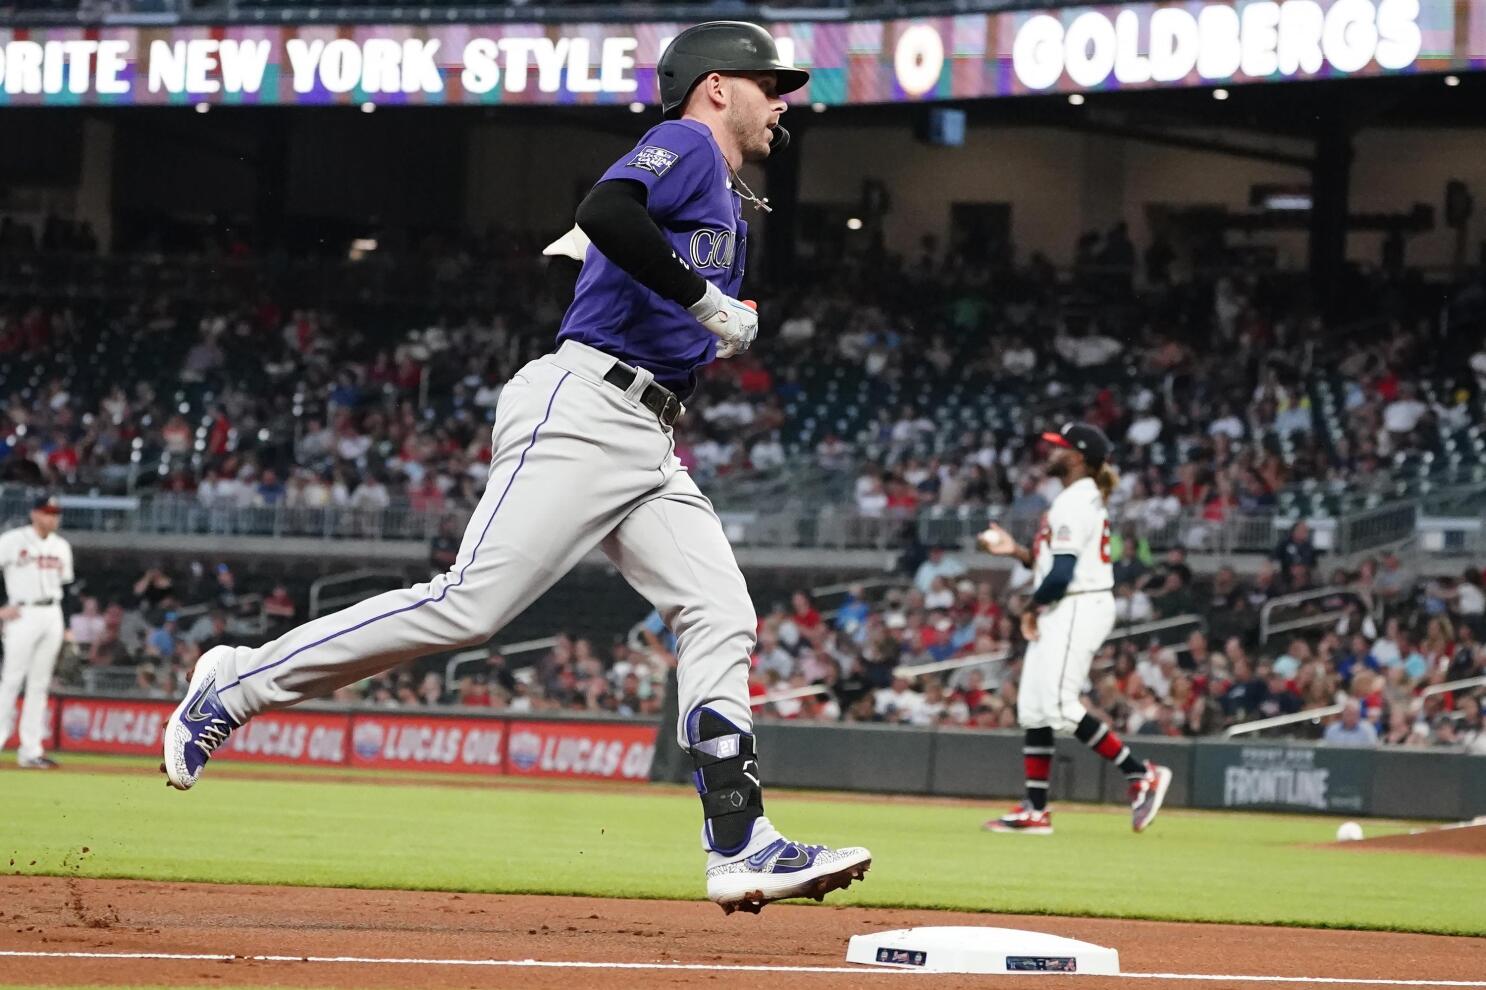 Tapia's solo HR in 9th lifts Rockies over Phillies 5-4